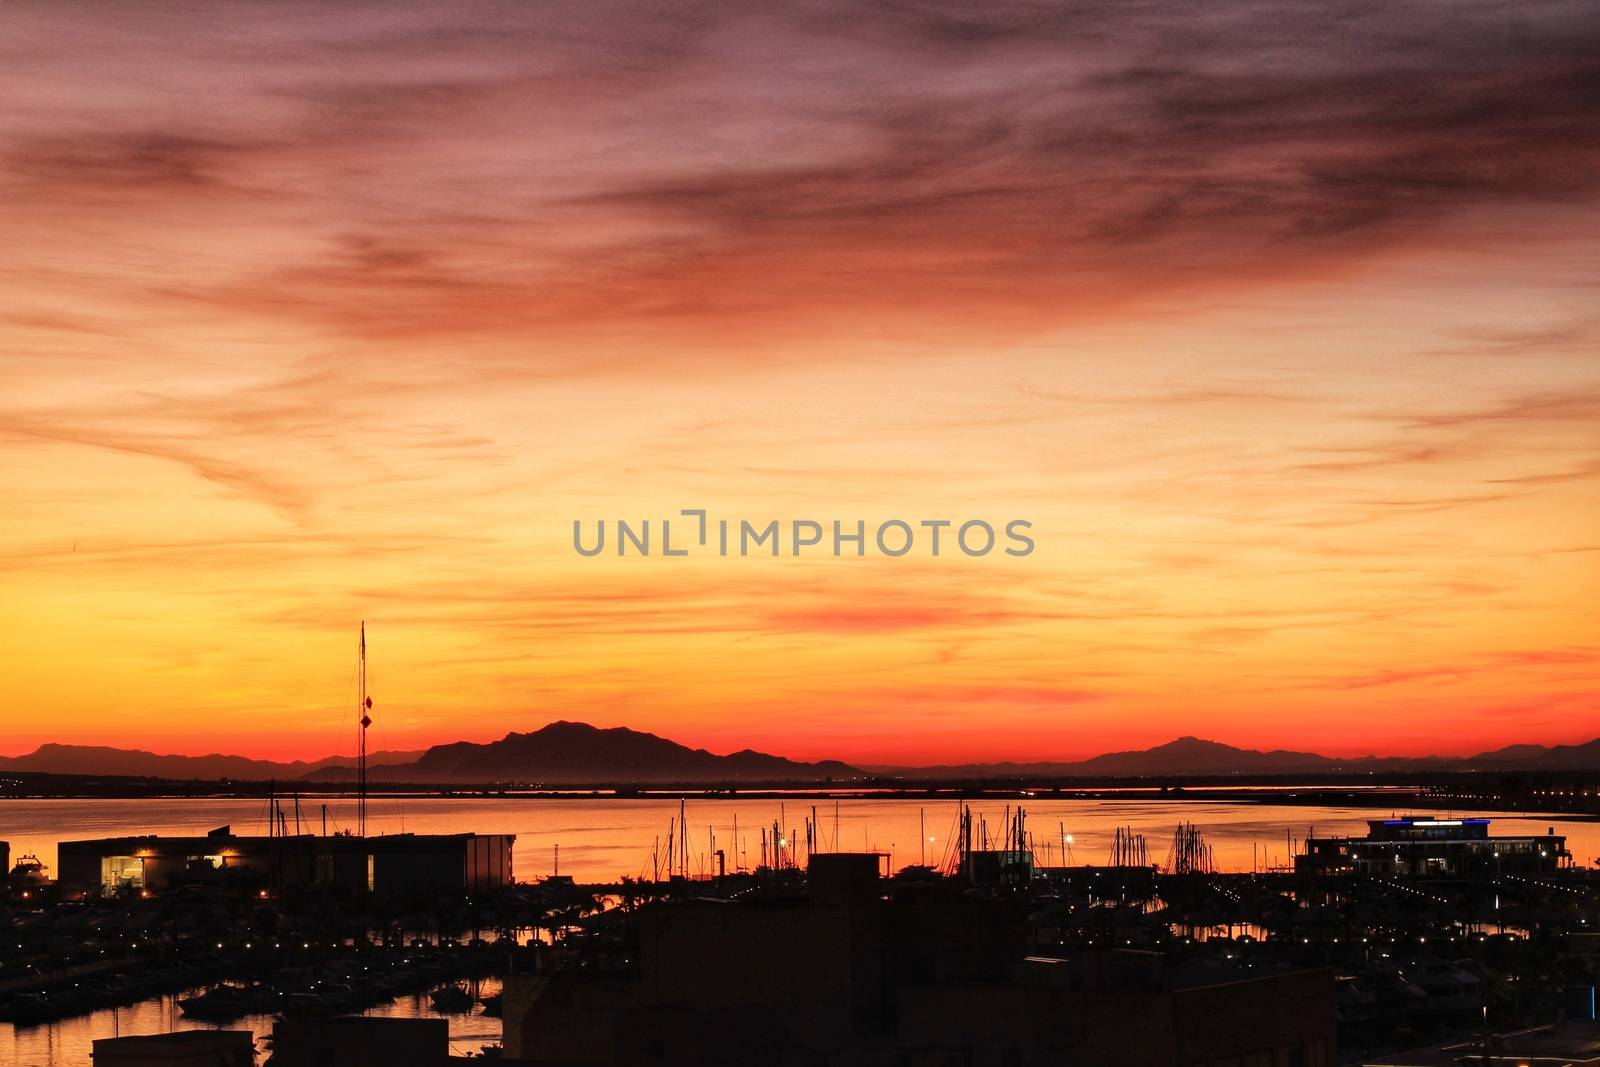 Sunset in Santa Pola, a small fishing village in southern Spain